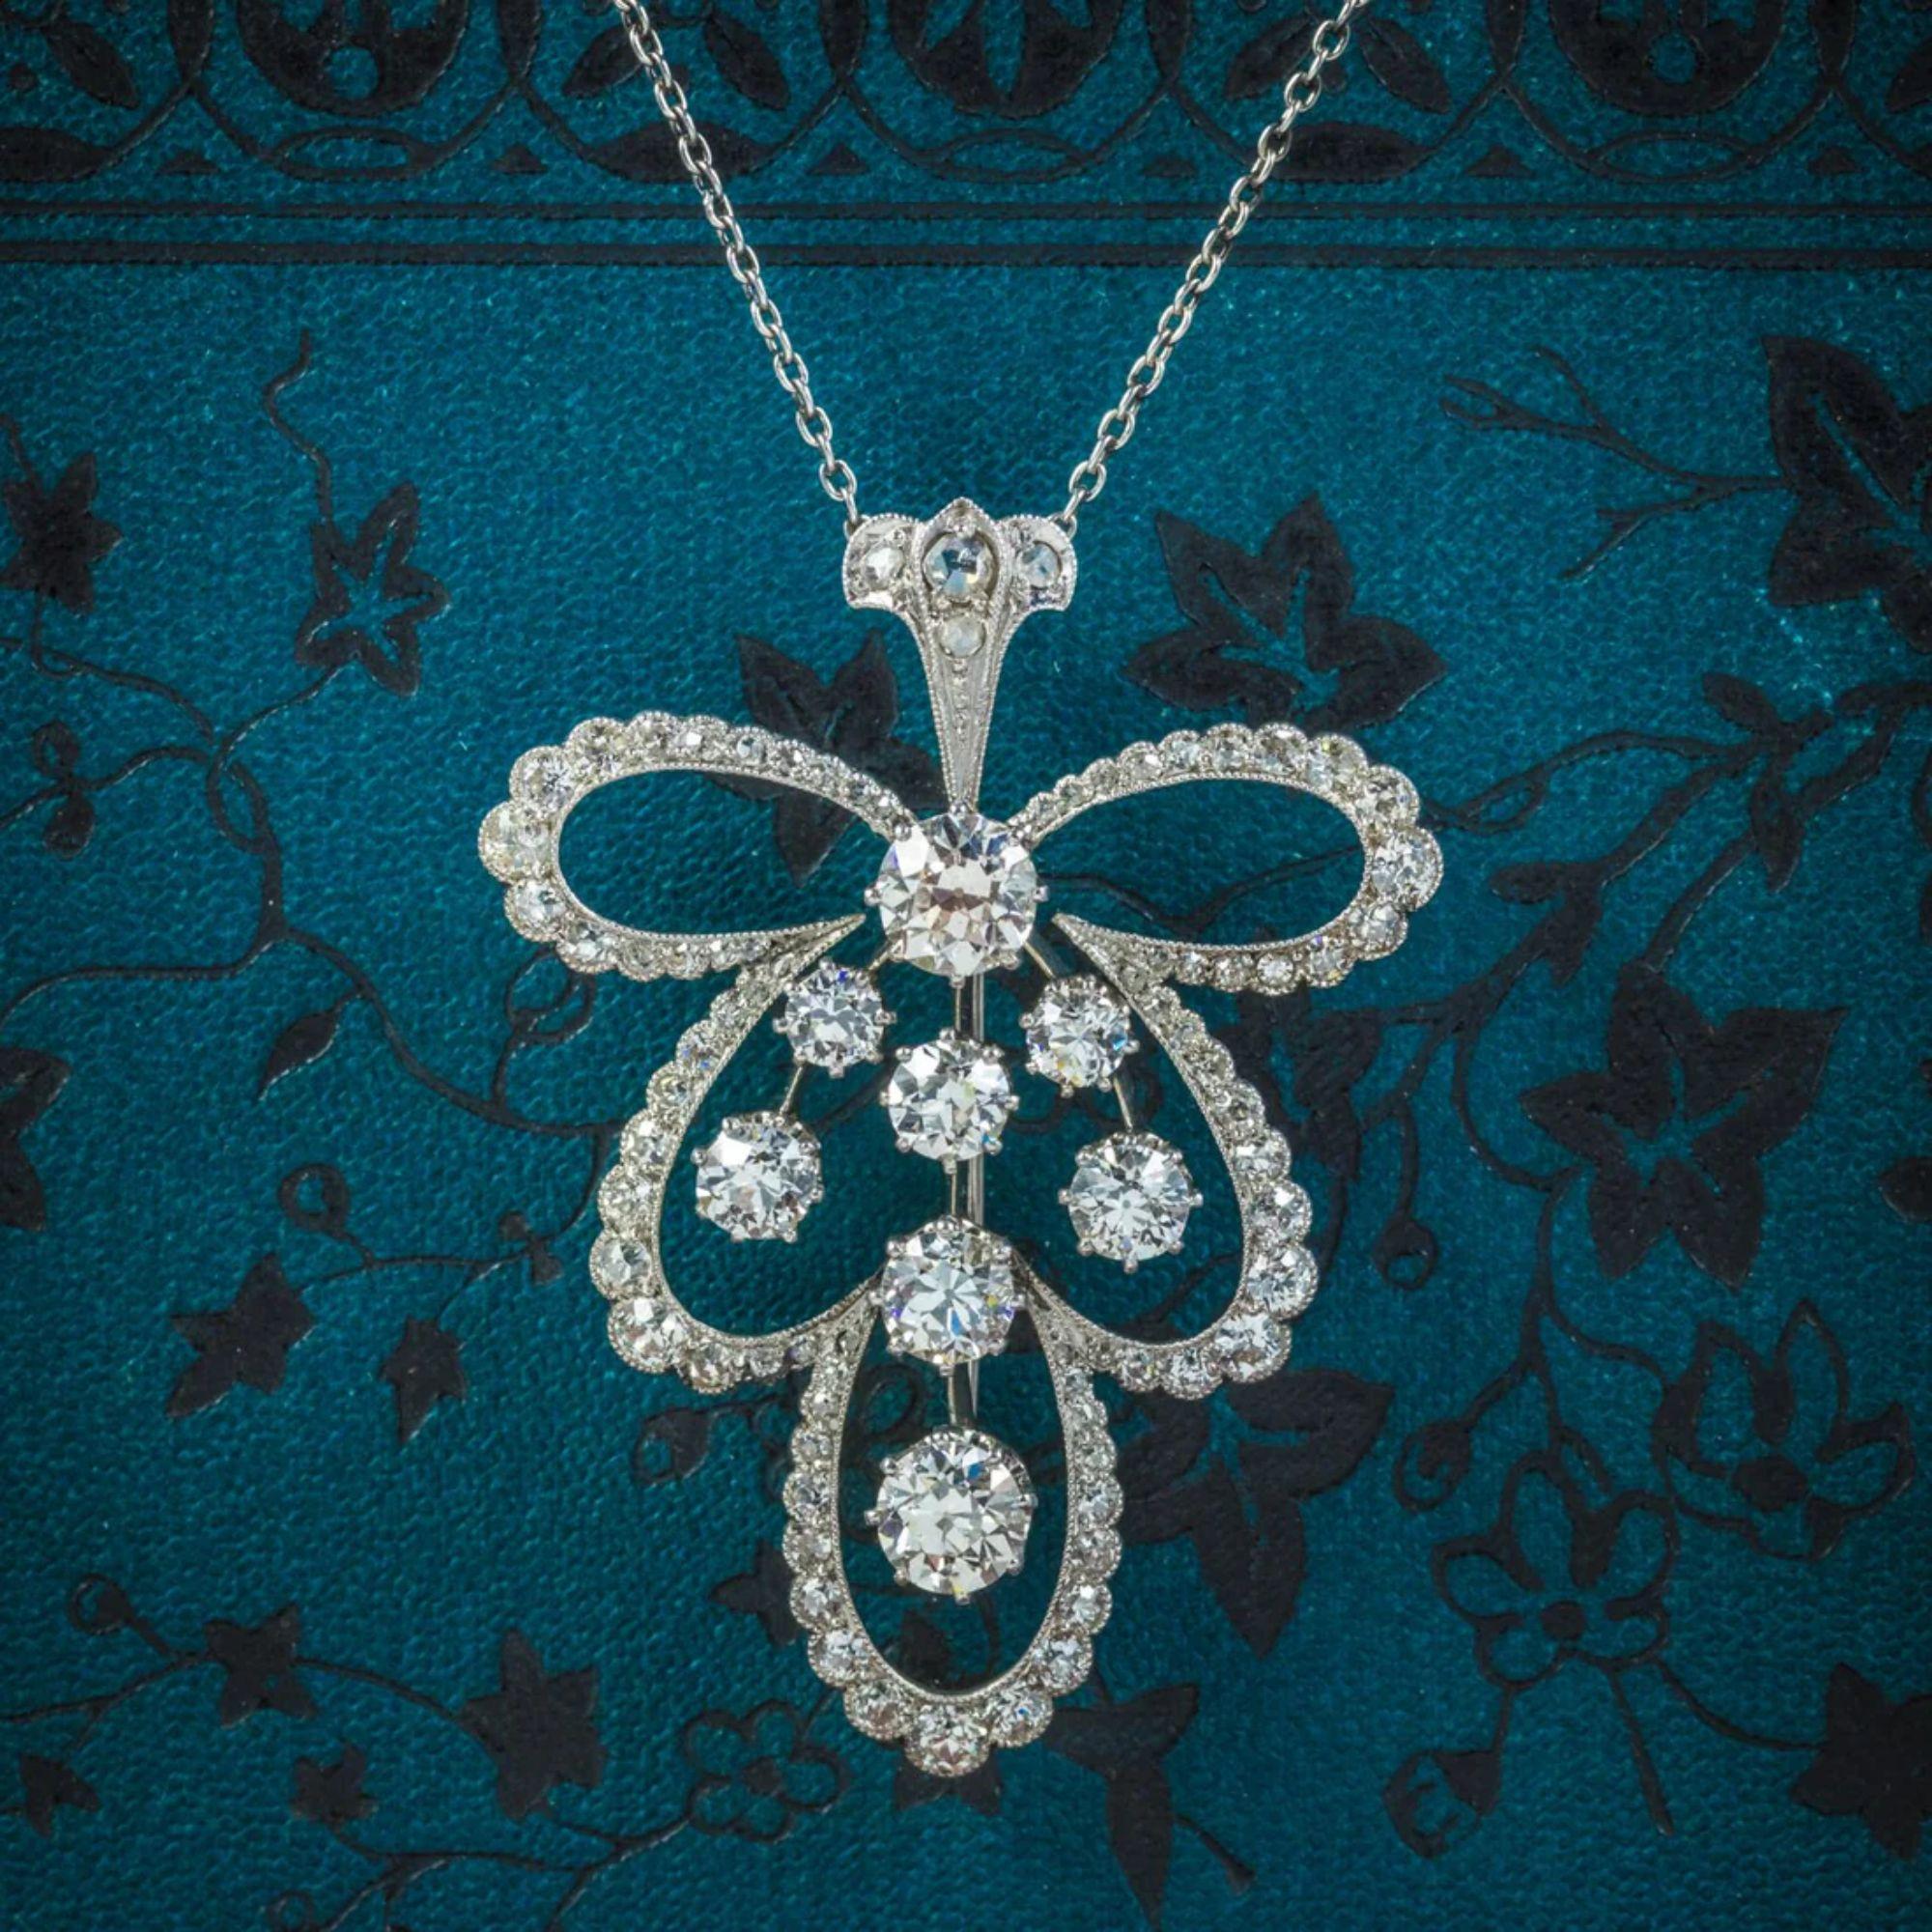 Antique Edwardian Diamond Pendant Necklace Platinum Brooch in 4cts of Diamond For Sale 3